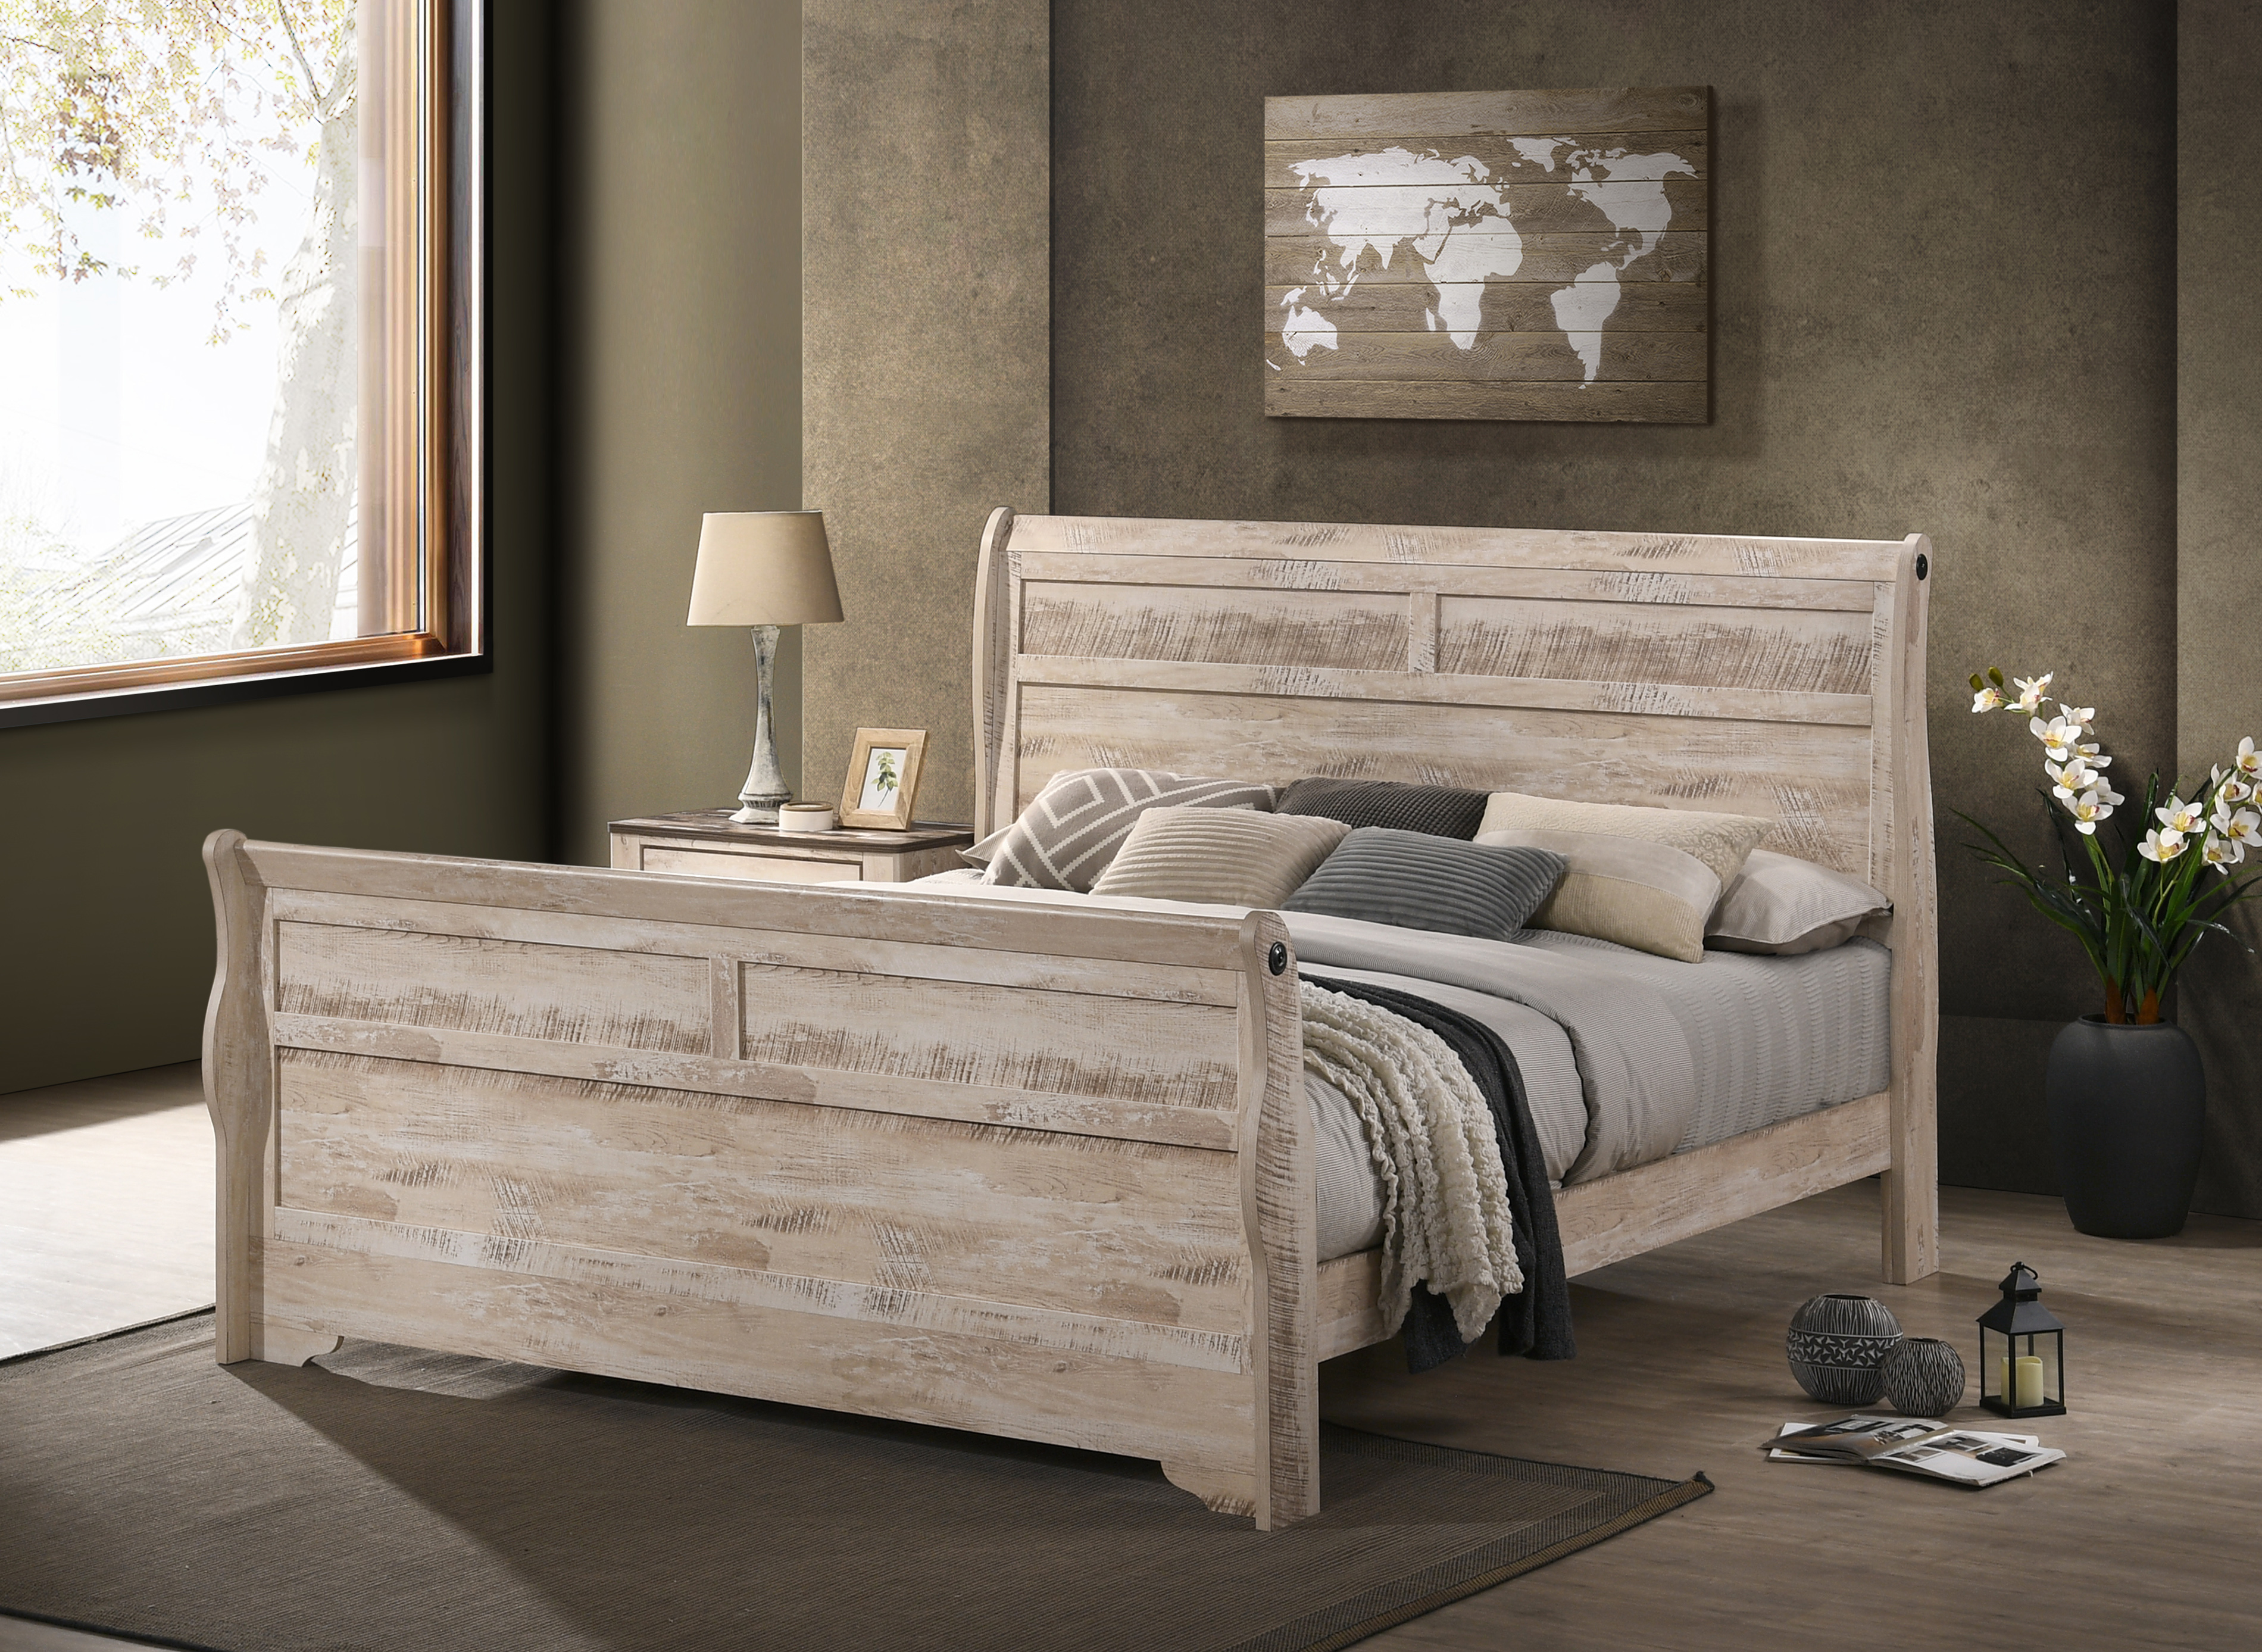 Imerland Contemporary White Wash Finish Bedroom Set with Queen Sleigh Bed, Dresser, Mirror, Two Nightstands - image 3 of 11